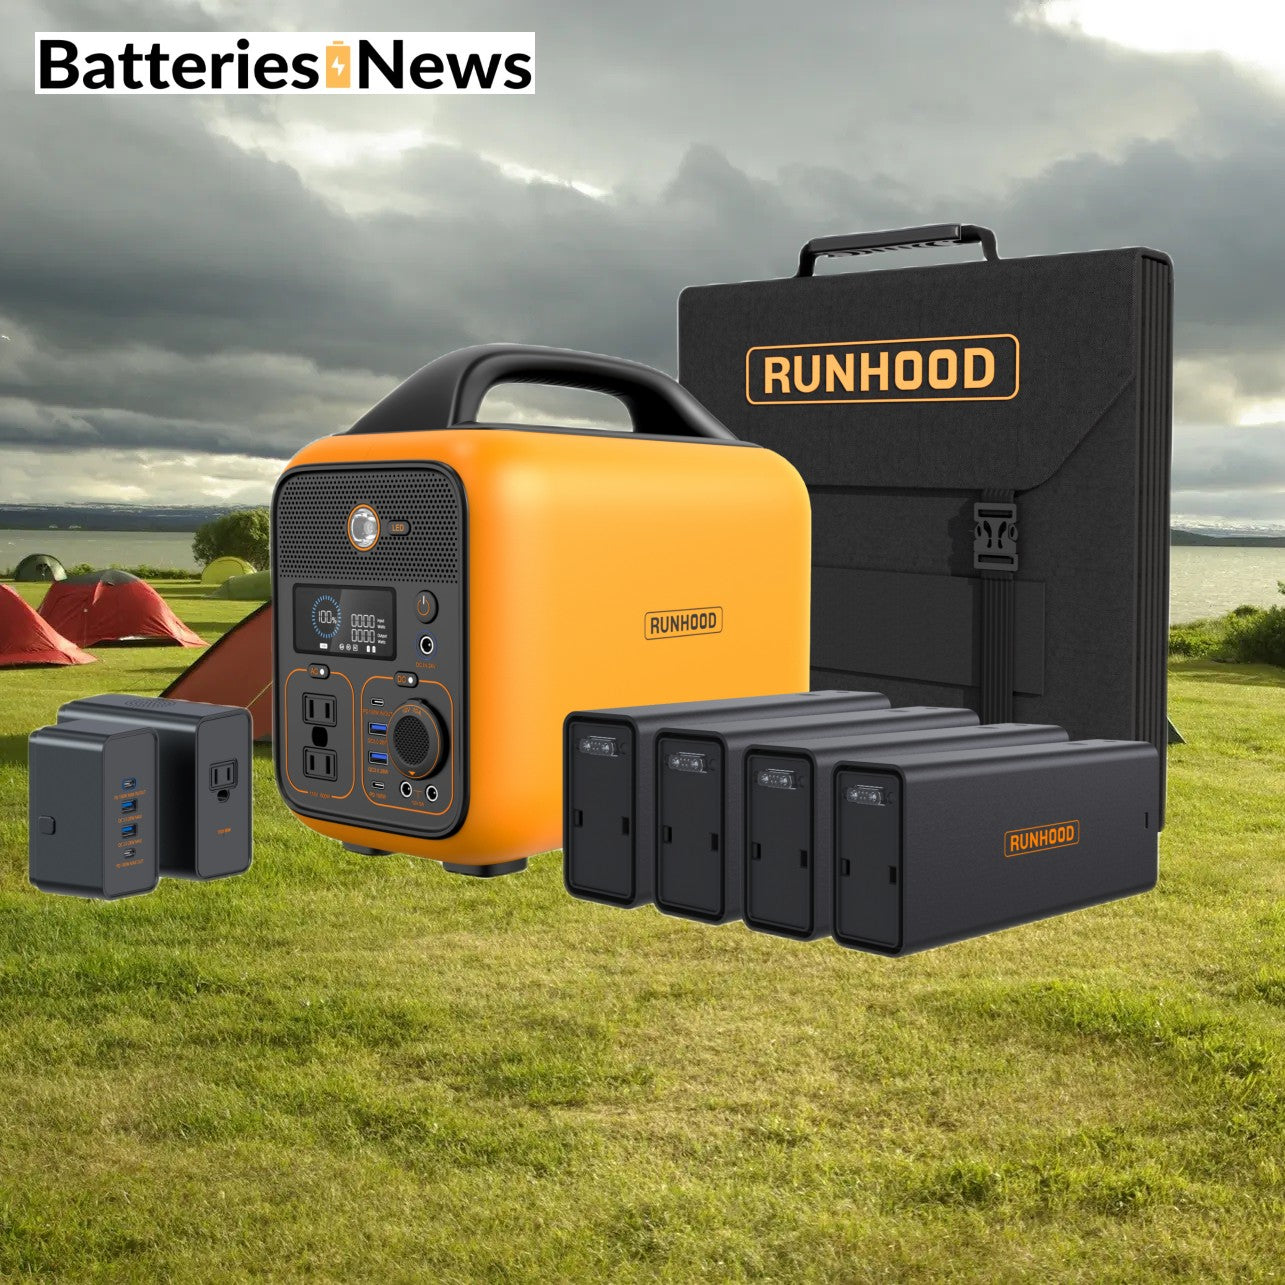 Runhood Launches First Modular Power Station with Swappable Batteries